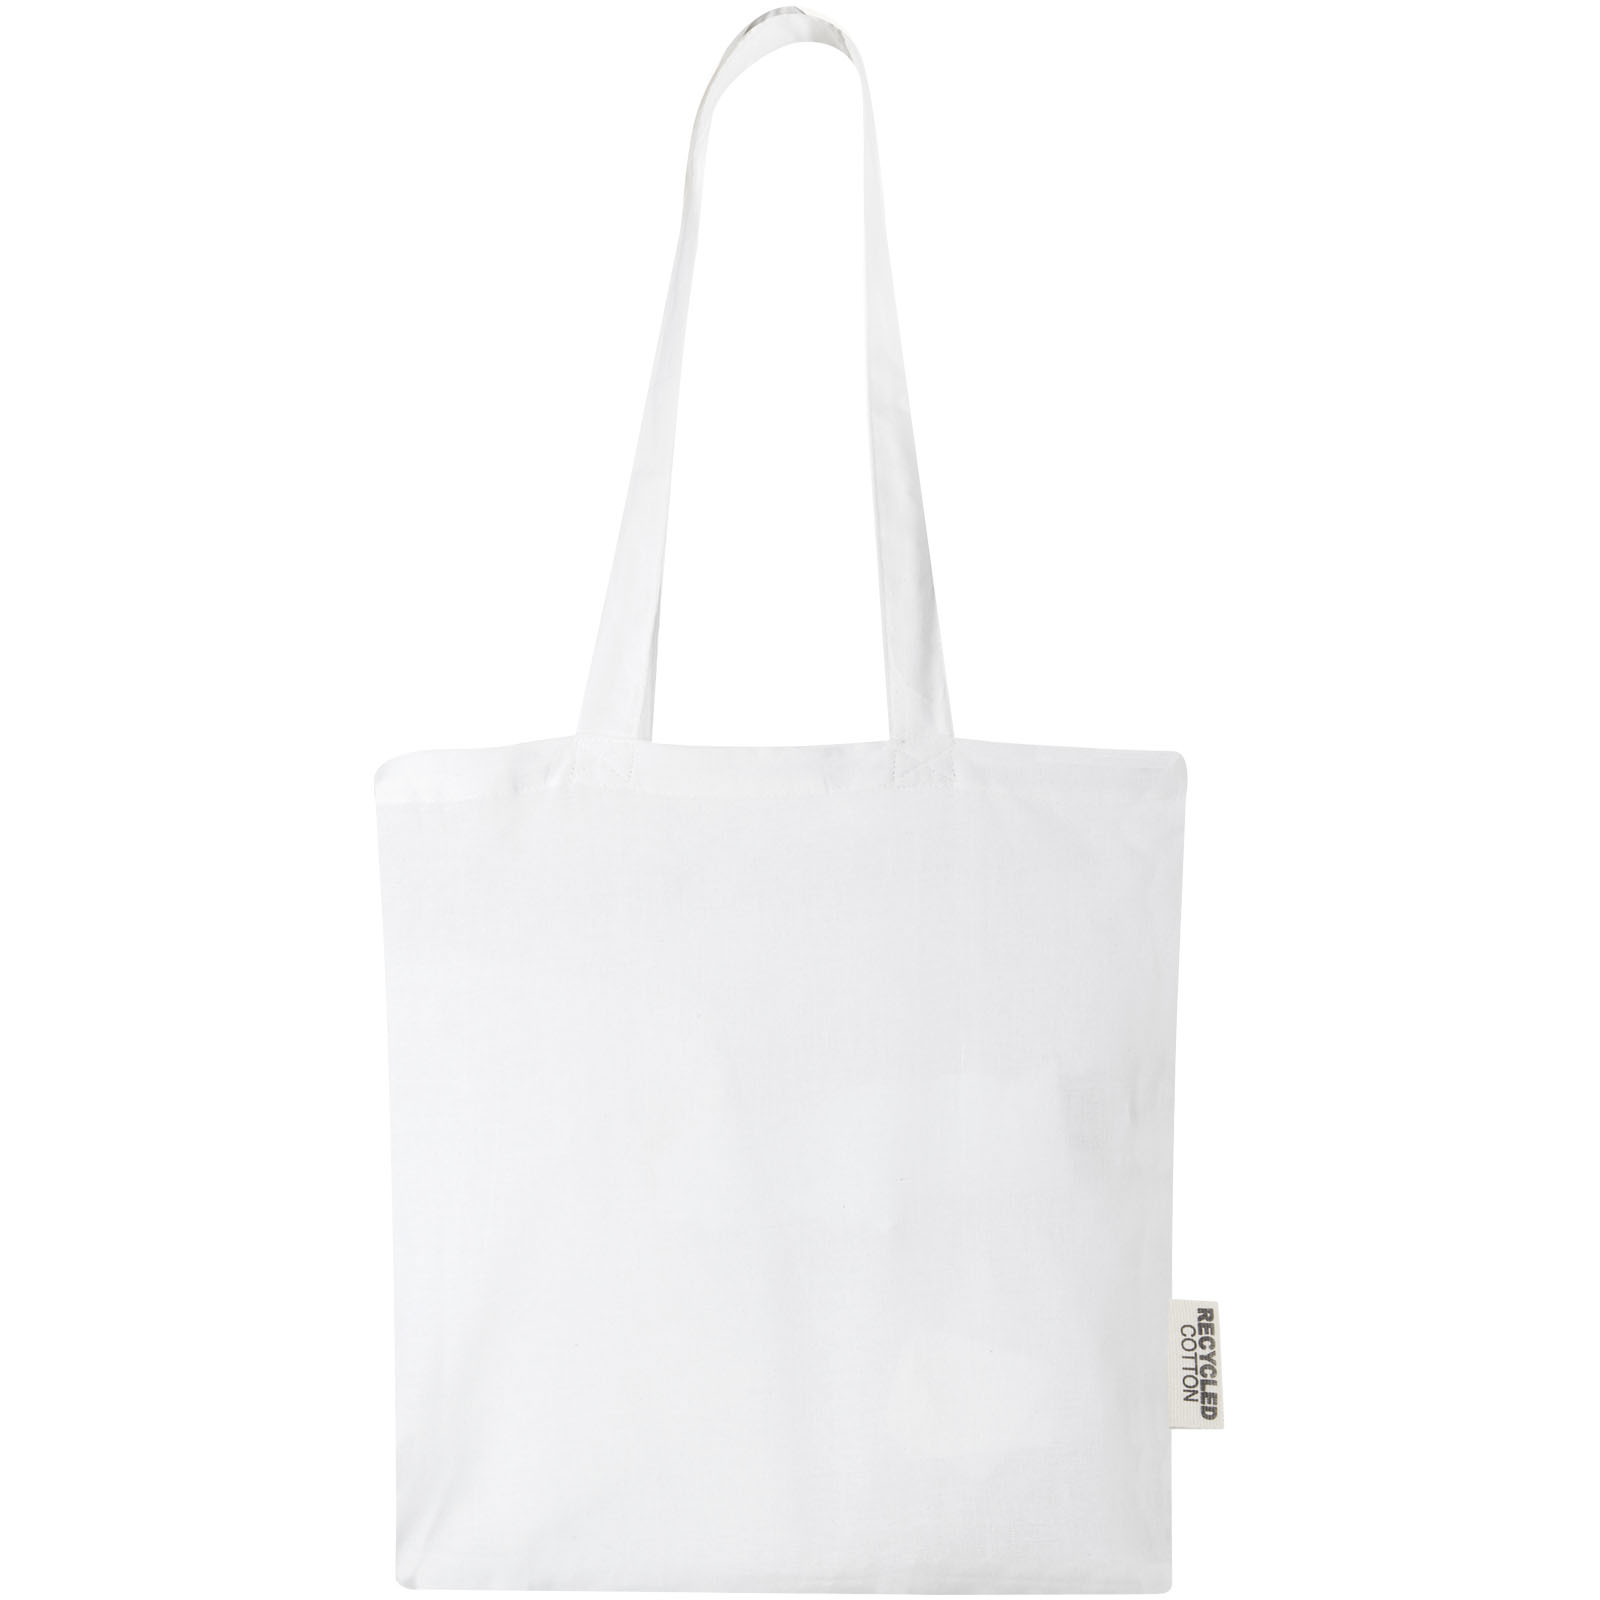 Advertising Shopping & Tote Bags - Madras 140 g/m2 GRS recycled cotton tote bag 7L - 1